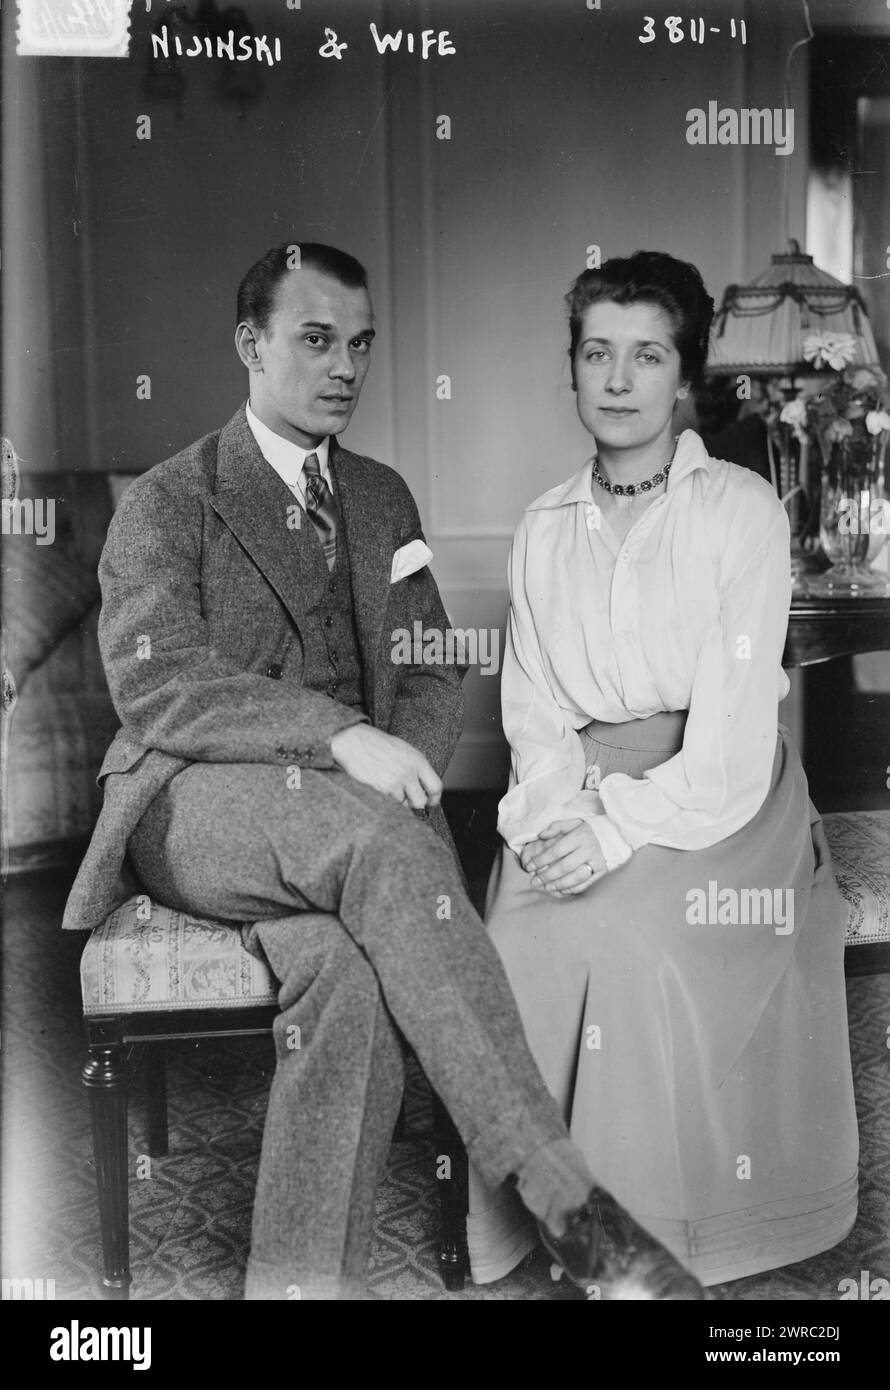 Nijinski and wife, Photograph shows Russian ballet dancer Vaslav Nijinsky (1889-1950) and his wife Romola de Pulszky (1891-1978) in 1916., between ca. 1915 and ca. 1920, Glass negatives, 1 negative: glass Stock Photo